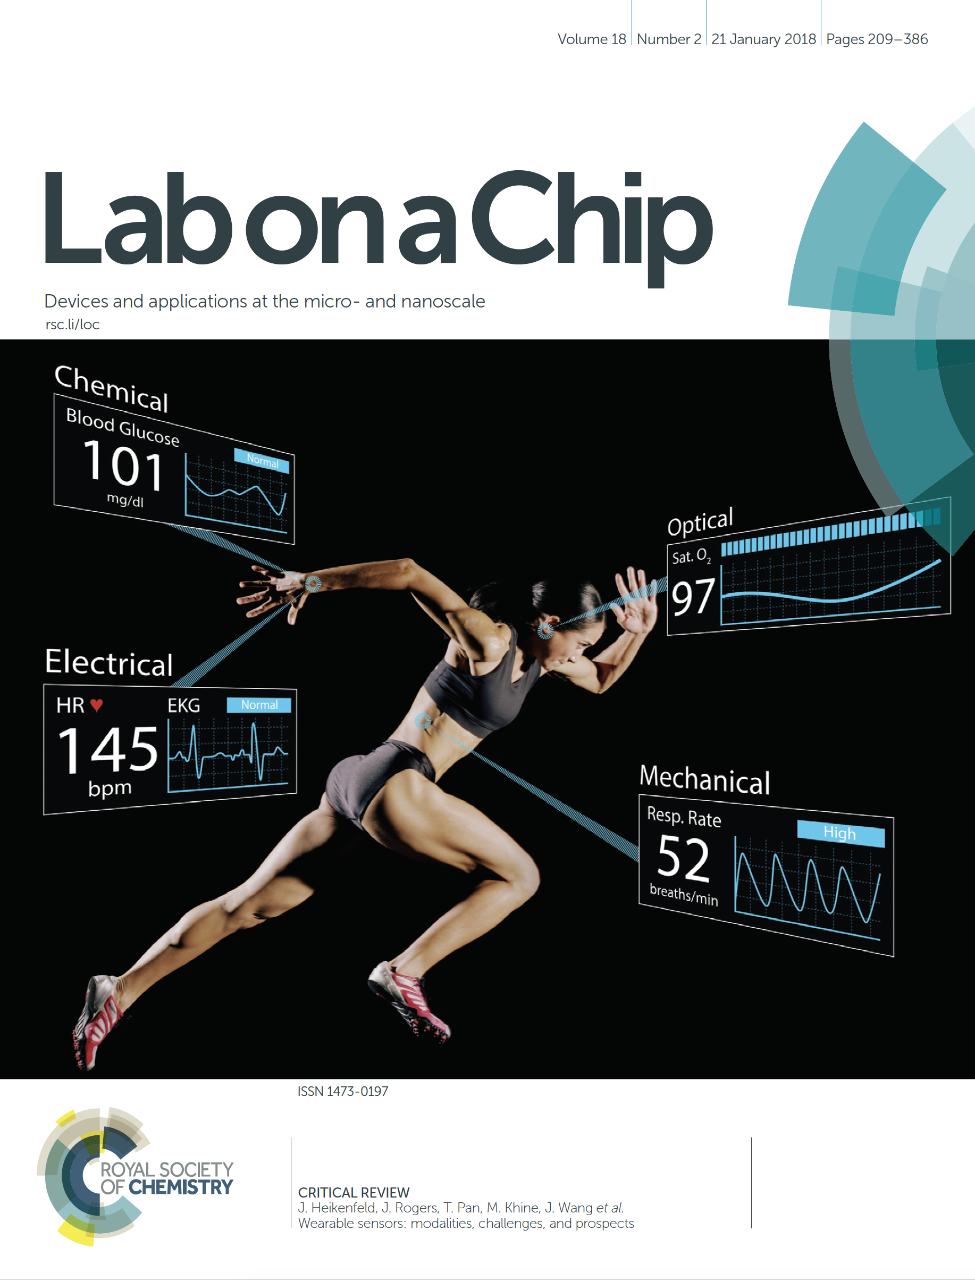 UC student Andrew Jajack designed the graphic depicting the four ways that sensors can record biometric data for athletes for the latest cover of the nanotechnology journal Lab on a Chip.